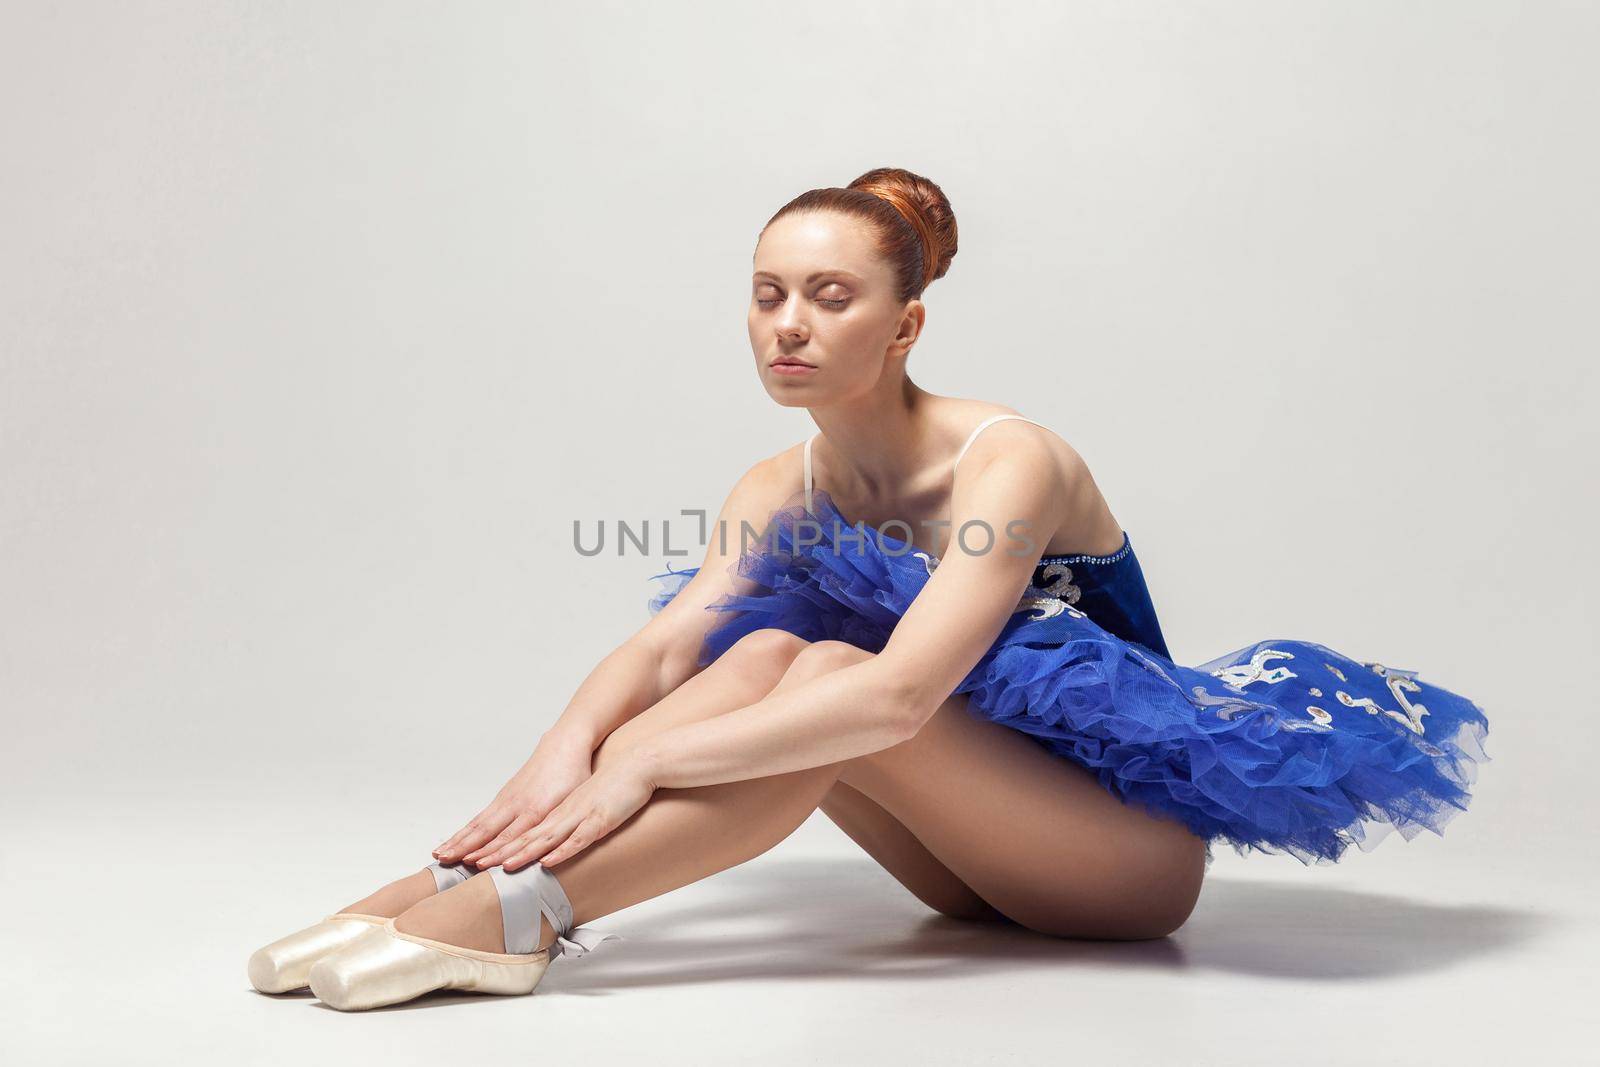 ballerina with closed eyes in blue dress and pointe shoes sitting on white floor. by Khosro1